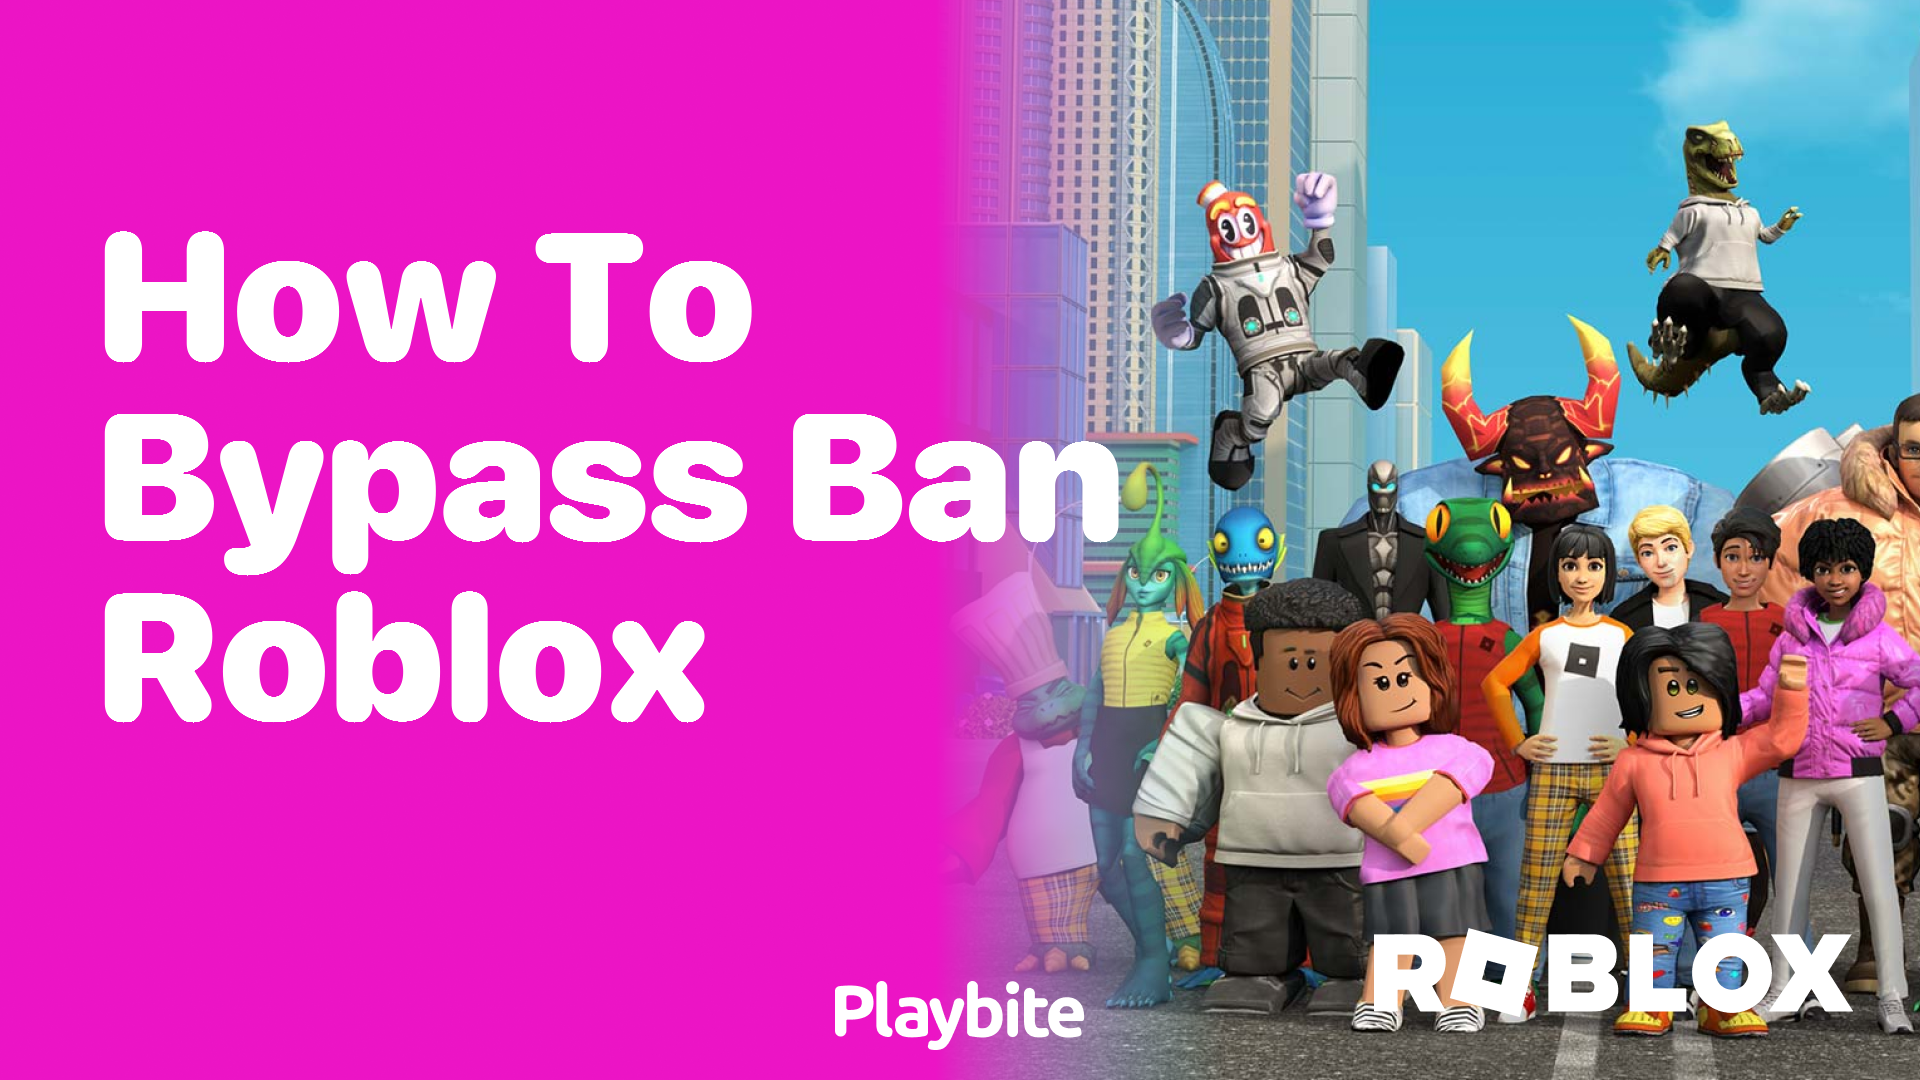 How to Bypass a Ban on Roblox?